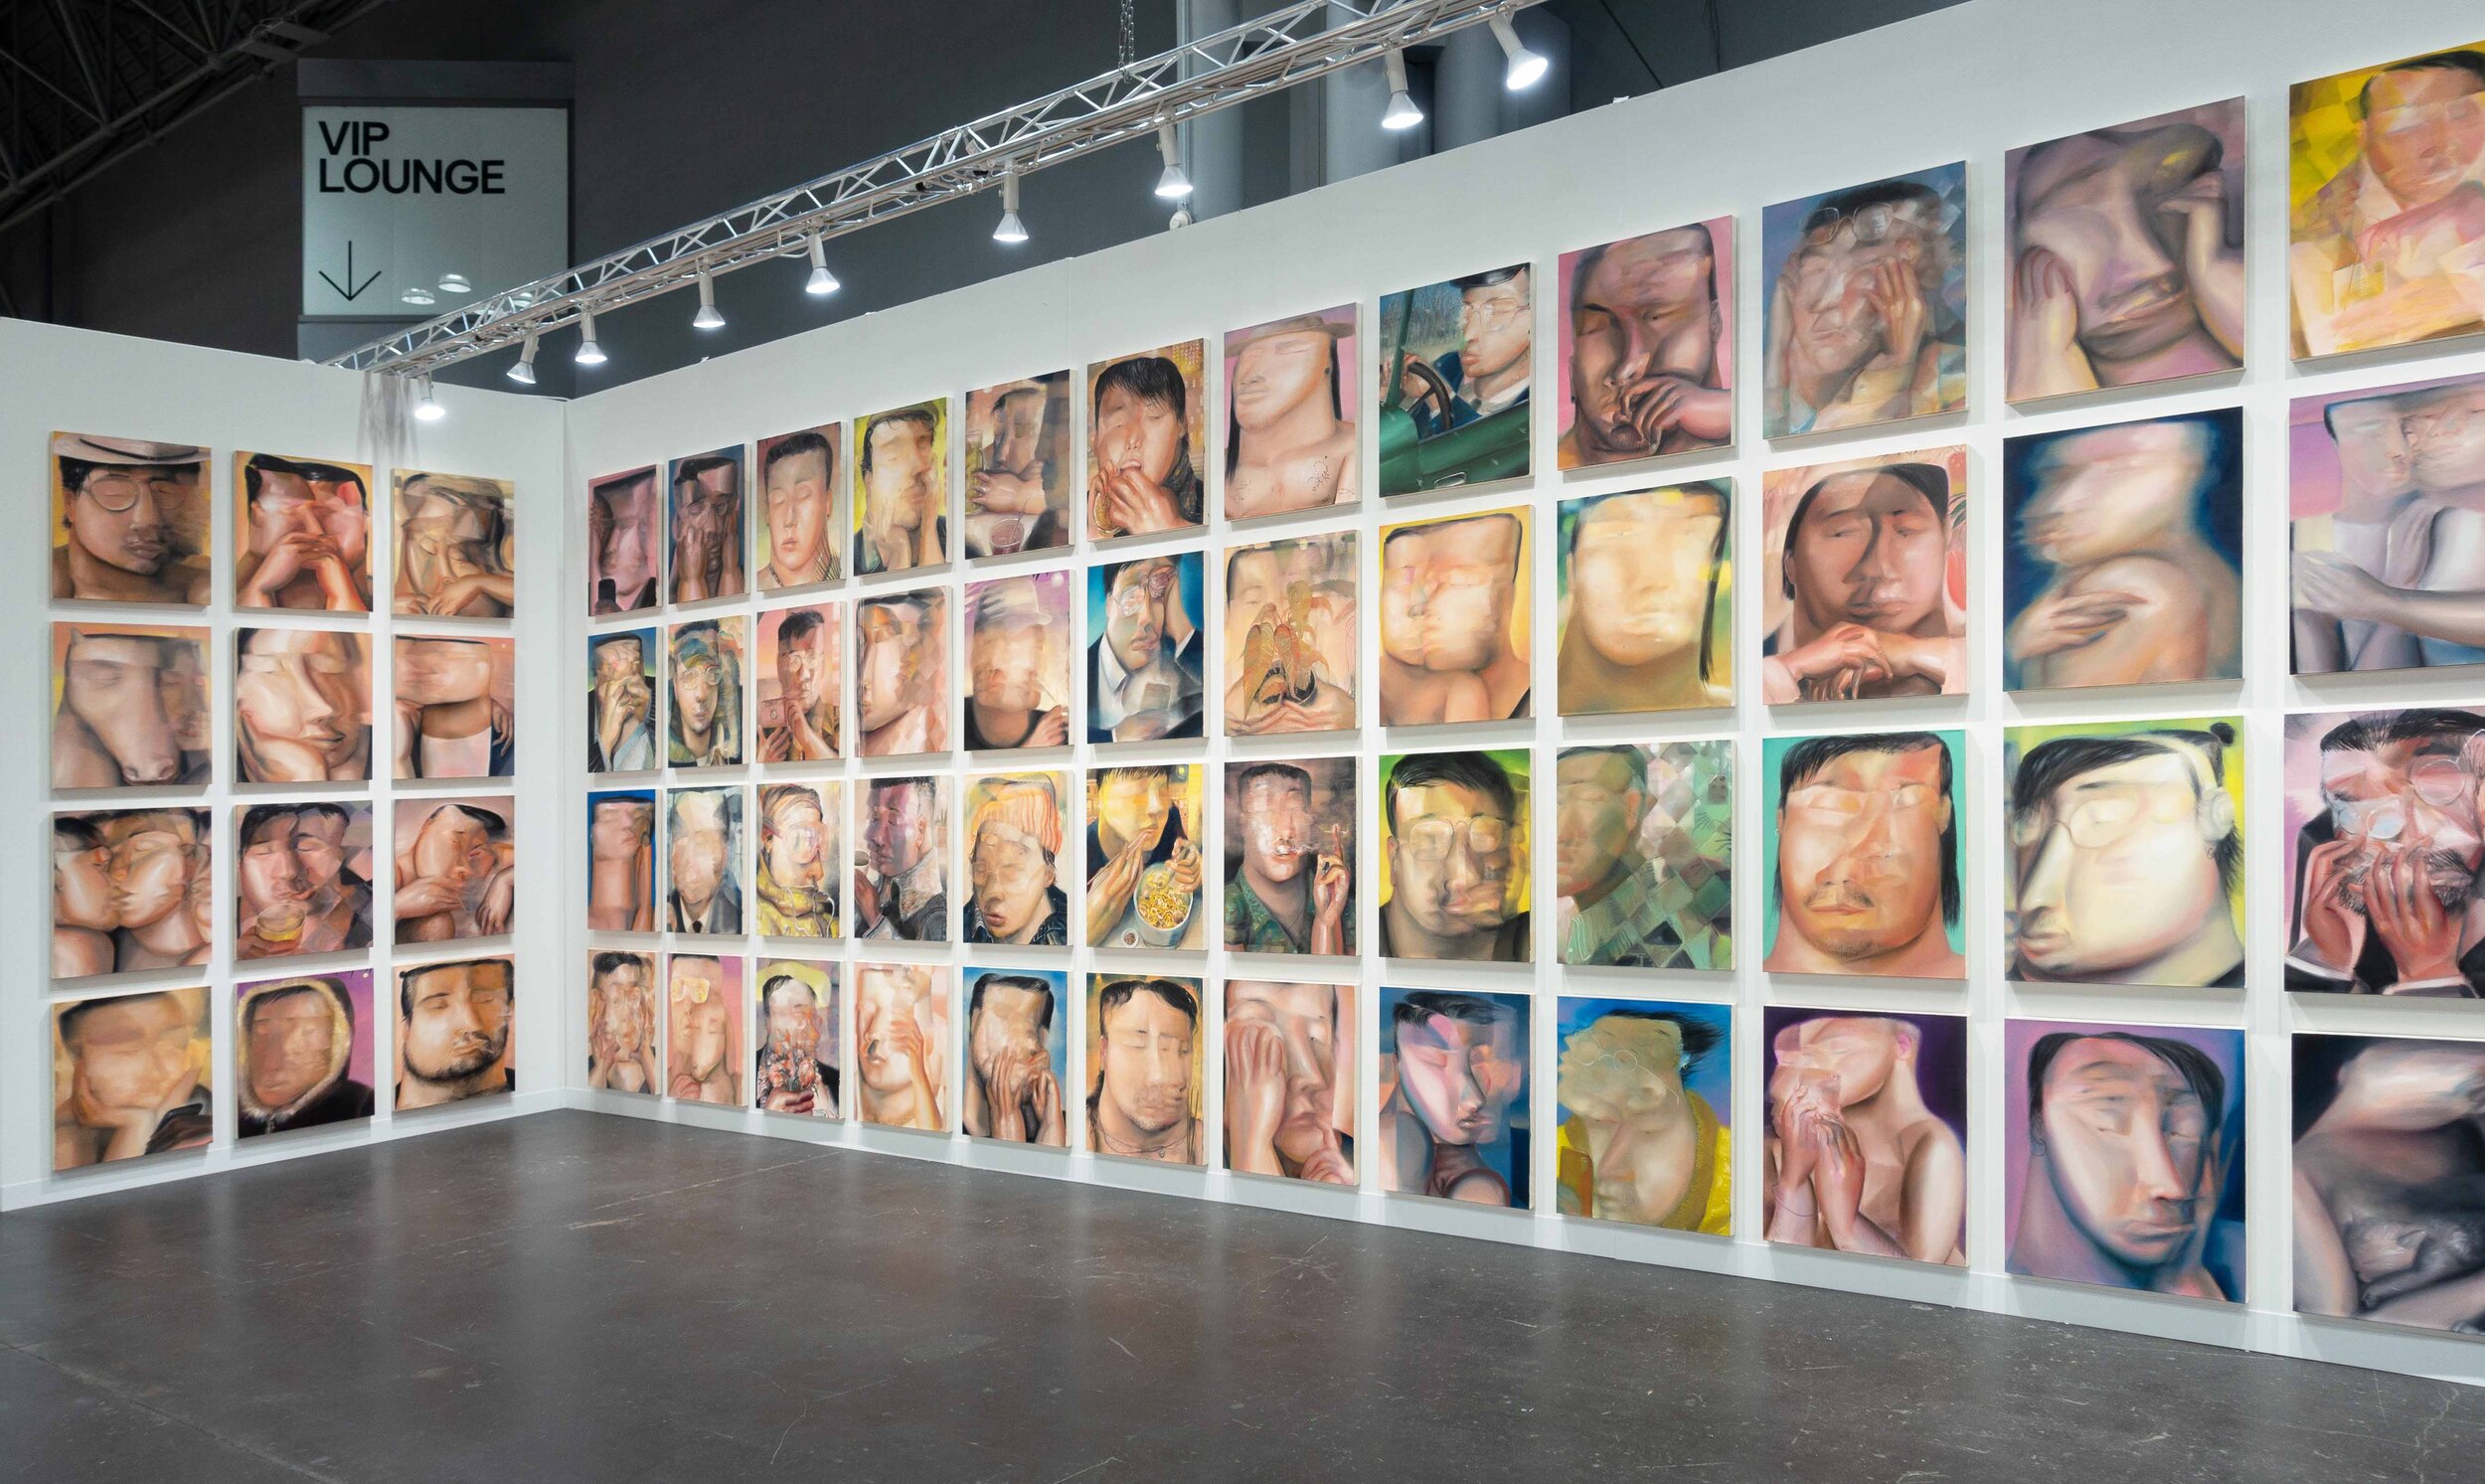    IN MY HEAD    Yavuz Gallery Booth 405, The Armory Show, New York City  9 - 12 September 2021  Consisting of 108 self-portraits,   “In My Head  ” is a monumental and immersive installation reflecting the artist’s ongoing interests in the physicalit